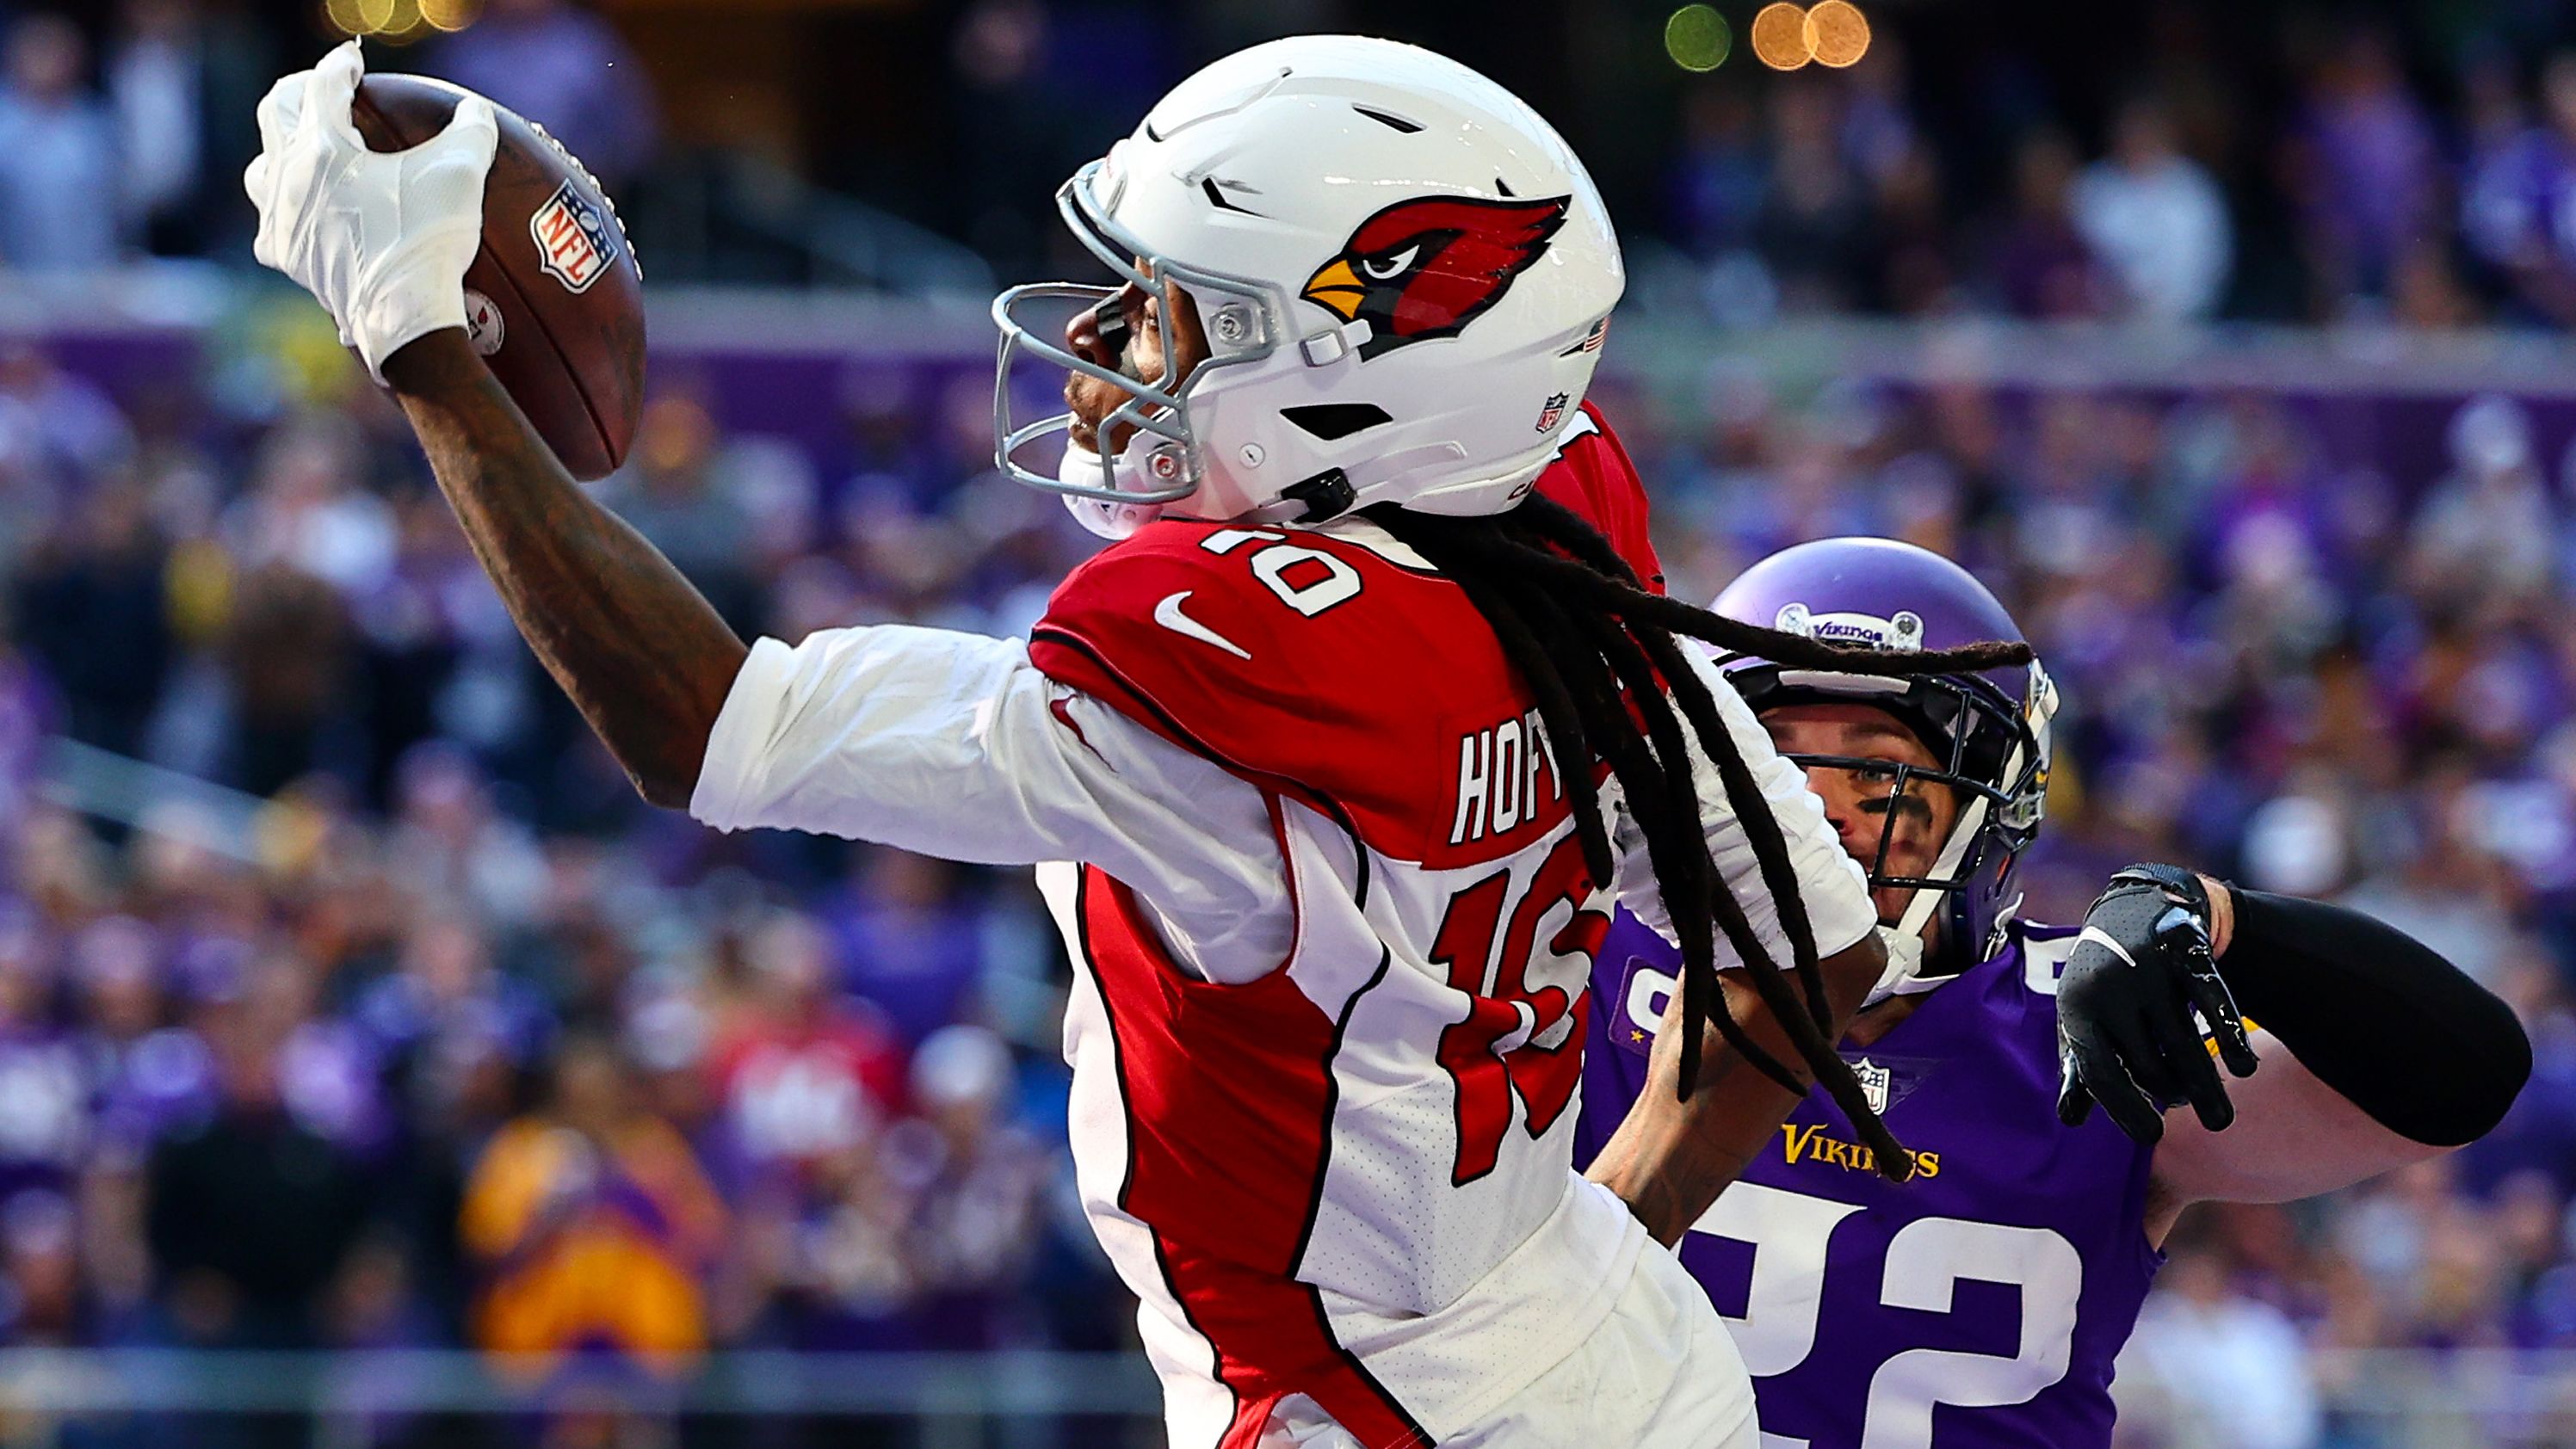 DeAndre Hopkins makes a one-handed catch to reel in a touchdown for the Arizona Cardinals against the Minnesota Vikings on Sunday, October 30, in Minneapolis, Minnesota. <a href="https://www.cnn.com/2022/09/12/sport/gallery/nfl-2022-season/index.html" target="_blank">See the best photos from the 2022 NFL season</a>.